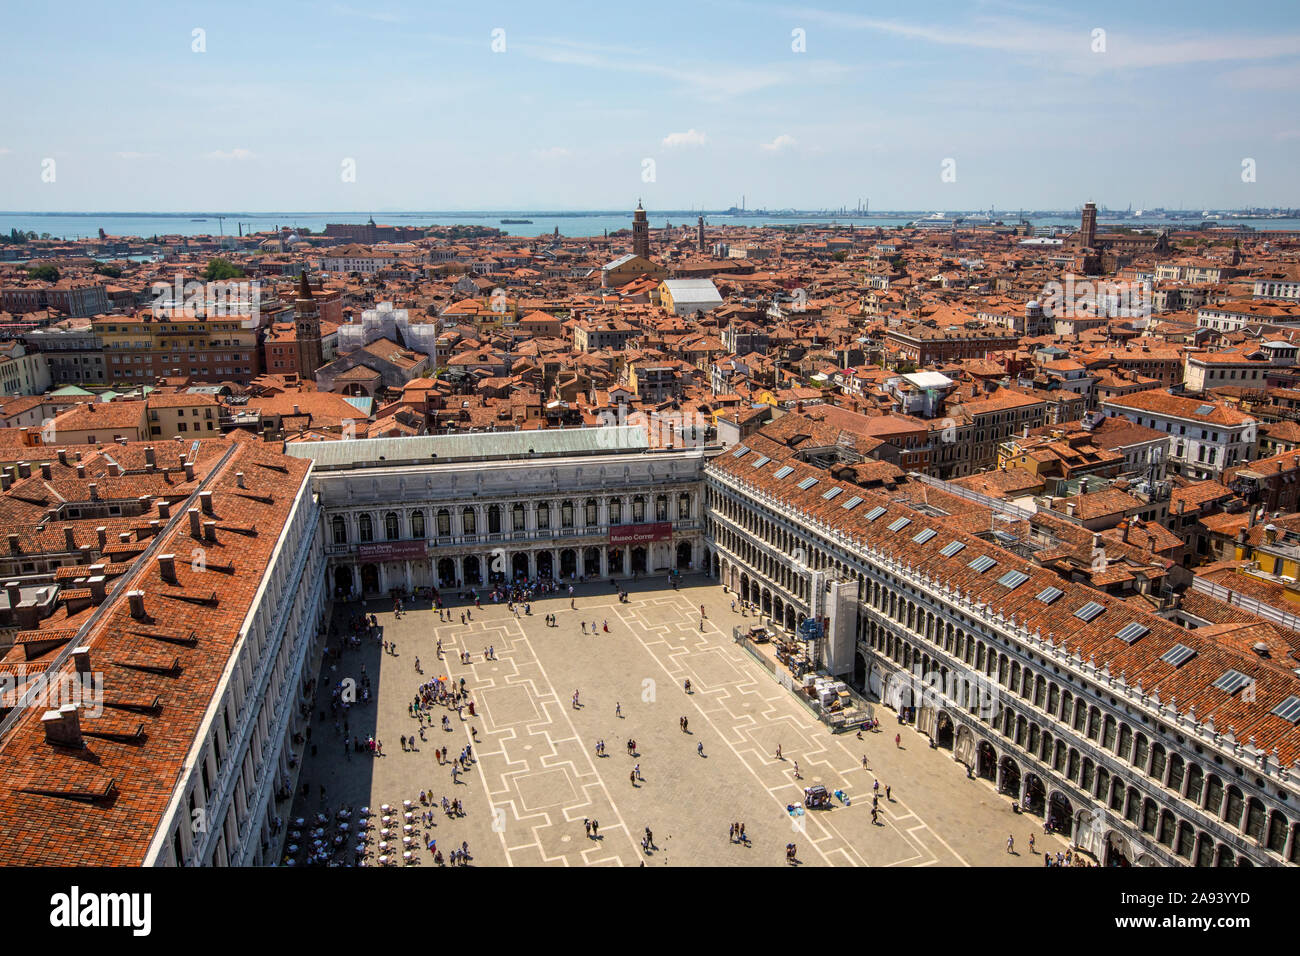 Venice, Italy - July 20th 2019: Piazza San Marco viewed from St. Marks Campanile bell tower in the historic city of Venice in Italy. Stock Photo